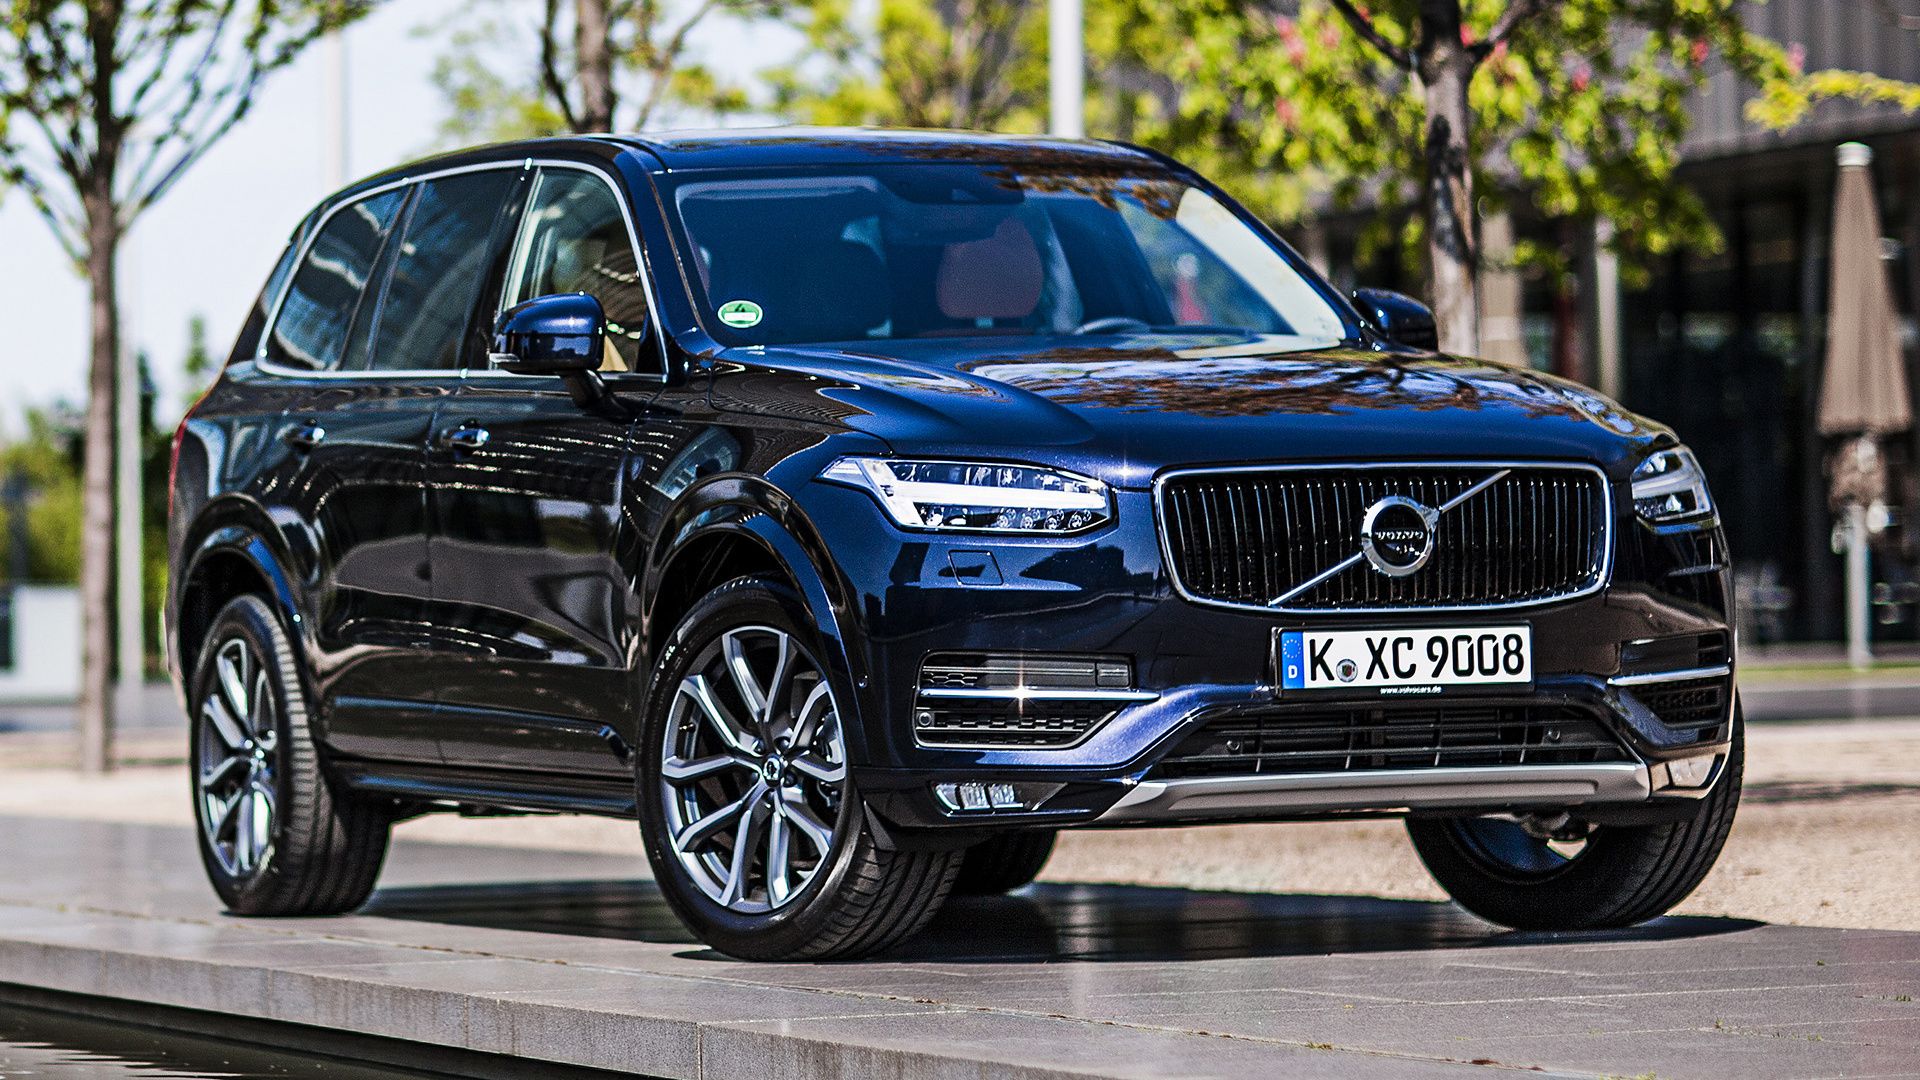 Free download Volvo XC90 Wallpaper and Background Image stmednet